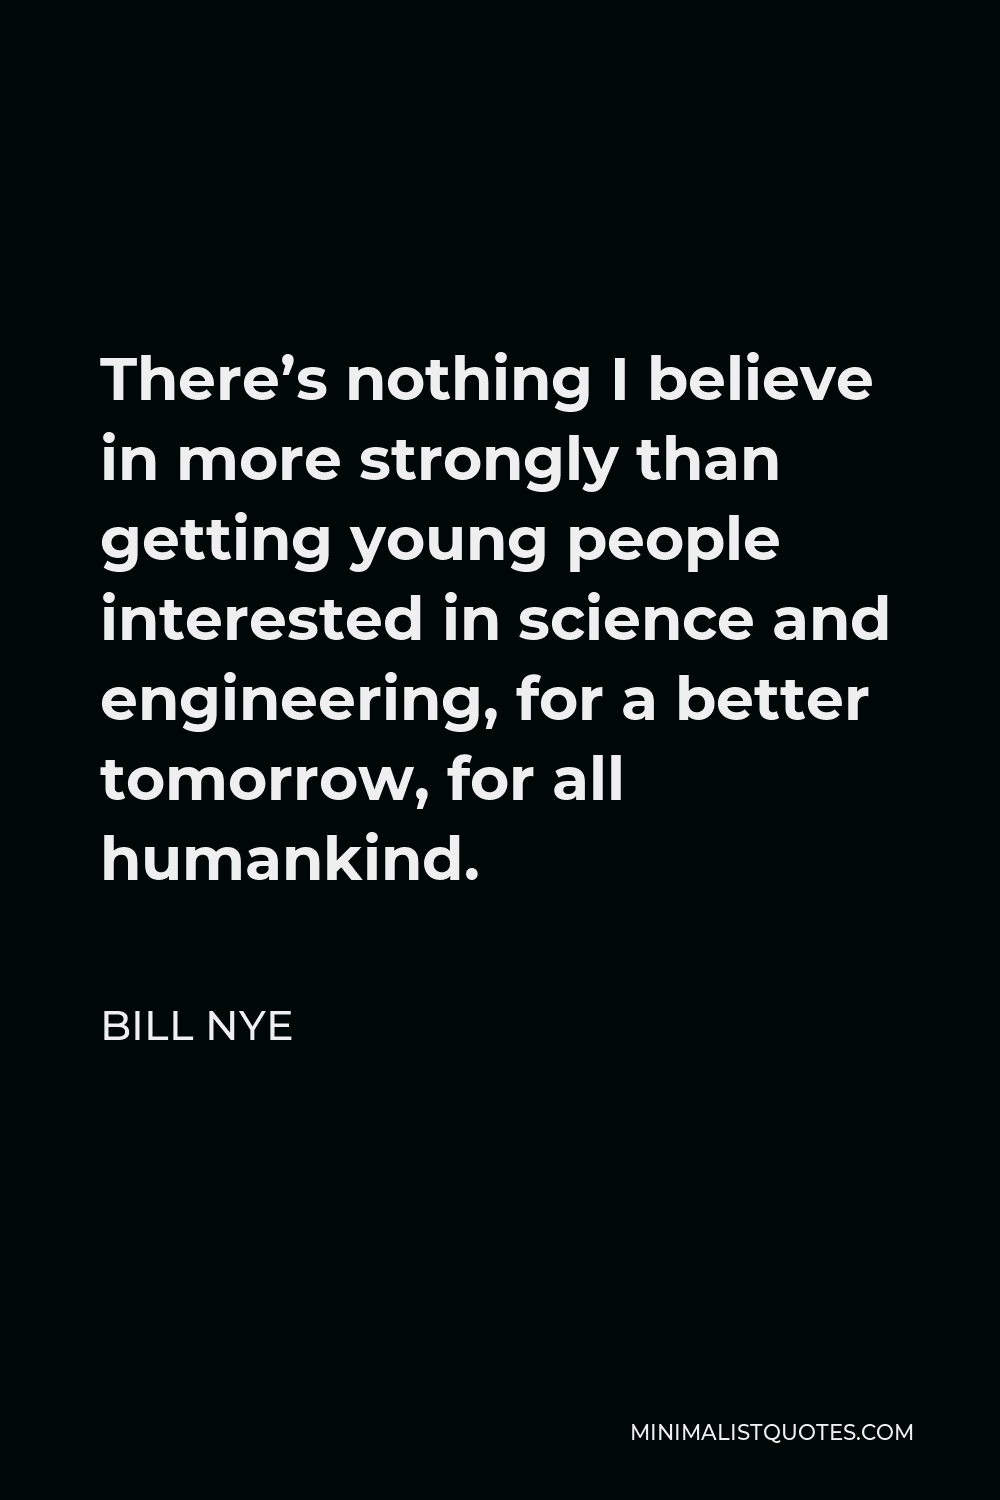 Bill Nye Quote - There’s nothing I believe in more strongly than getting young people interested in science and engineering, for a better tomorrow, for all humankind.